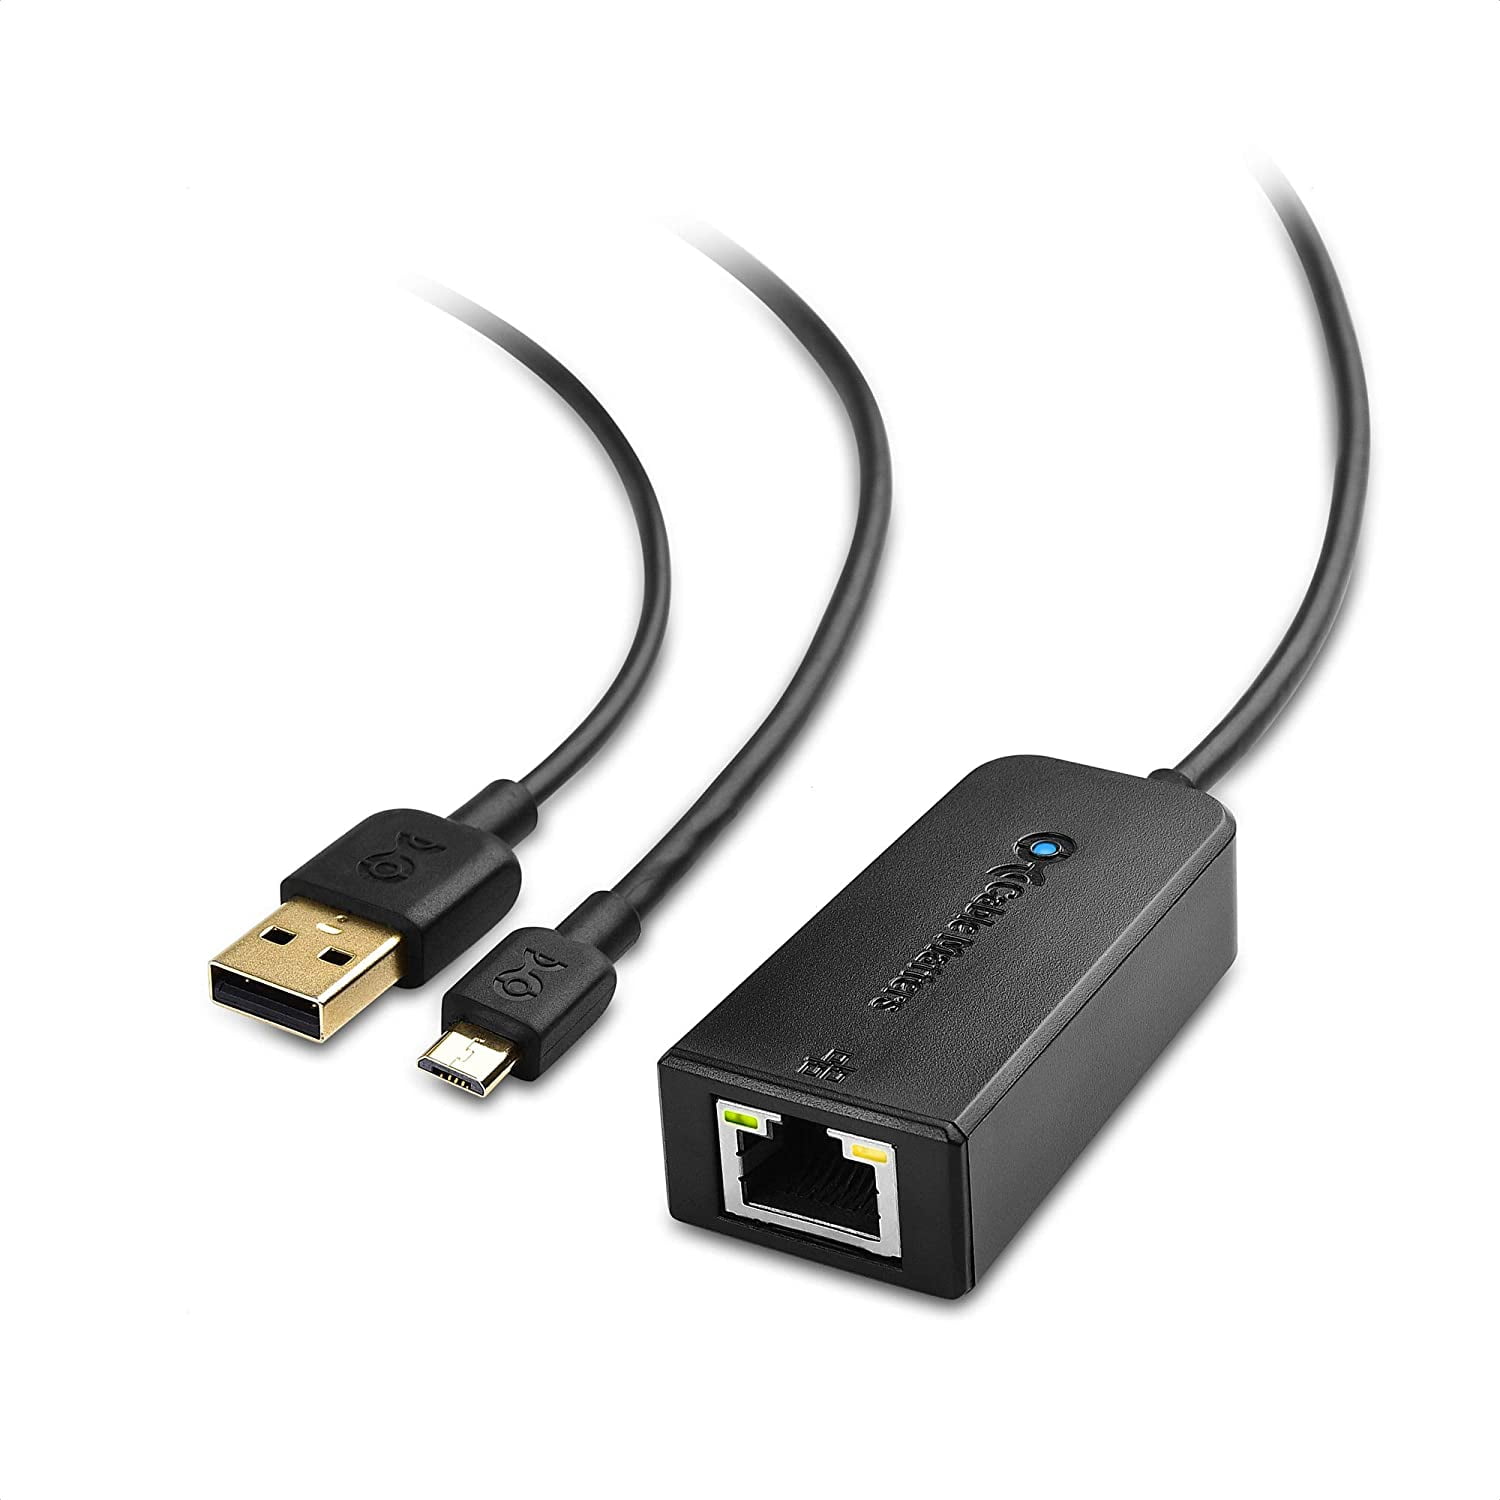 Cable Matters Micro USB to Ethernet Adapter Up to 480Mbps for